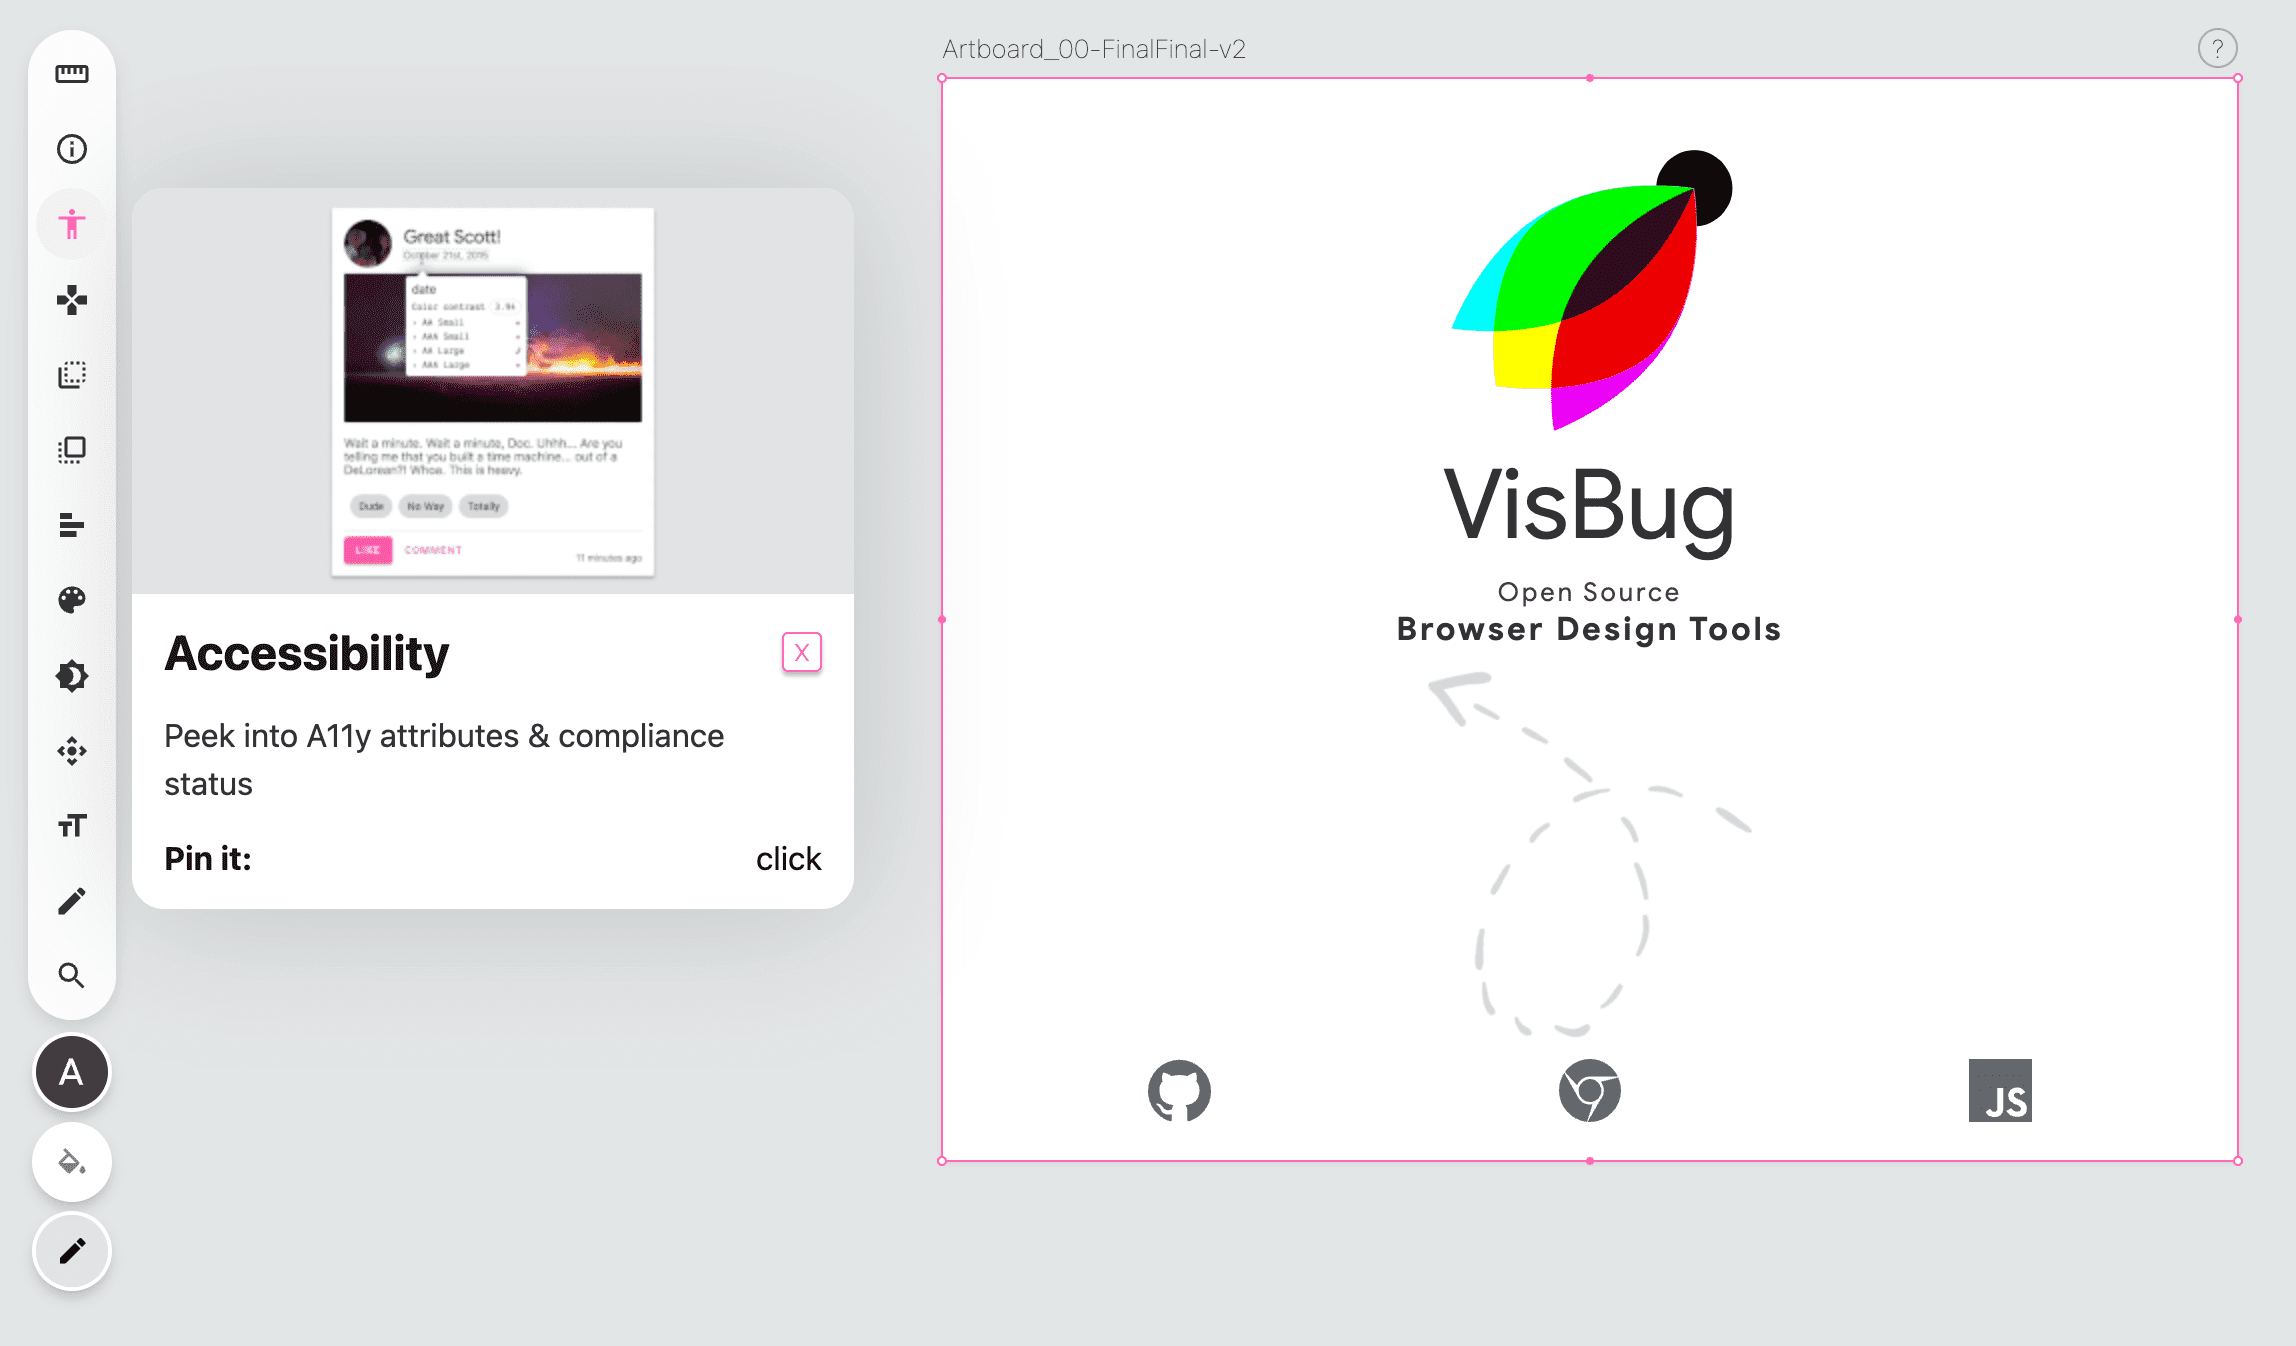 Screenshot of the VisBug toolbar on the left side of a blank page, the accessibility tool icon is pink and a popover is shown that provides instruction of the tool.